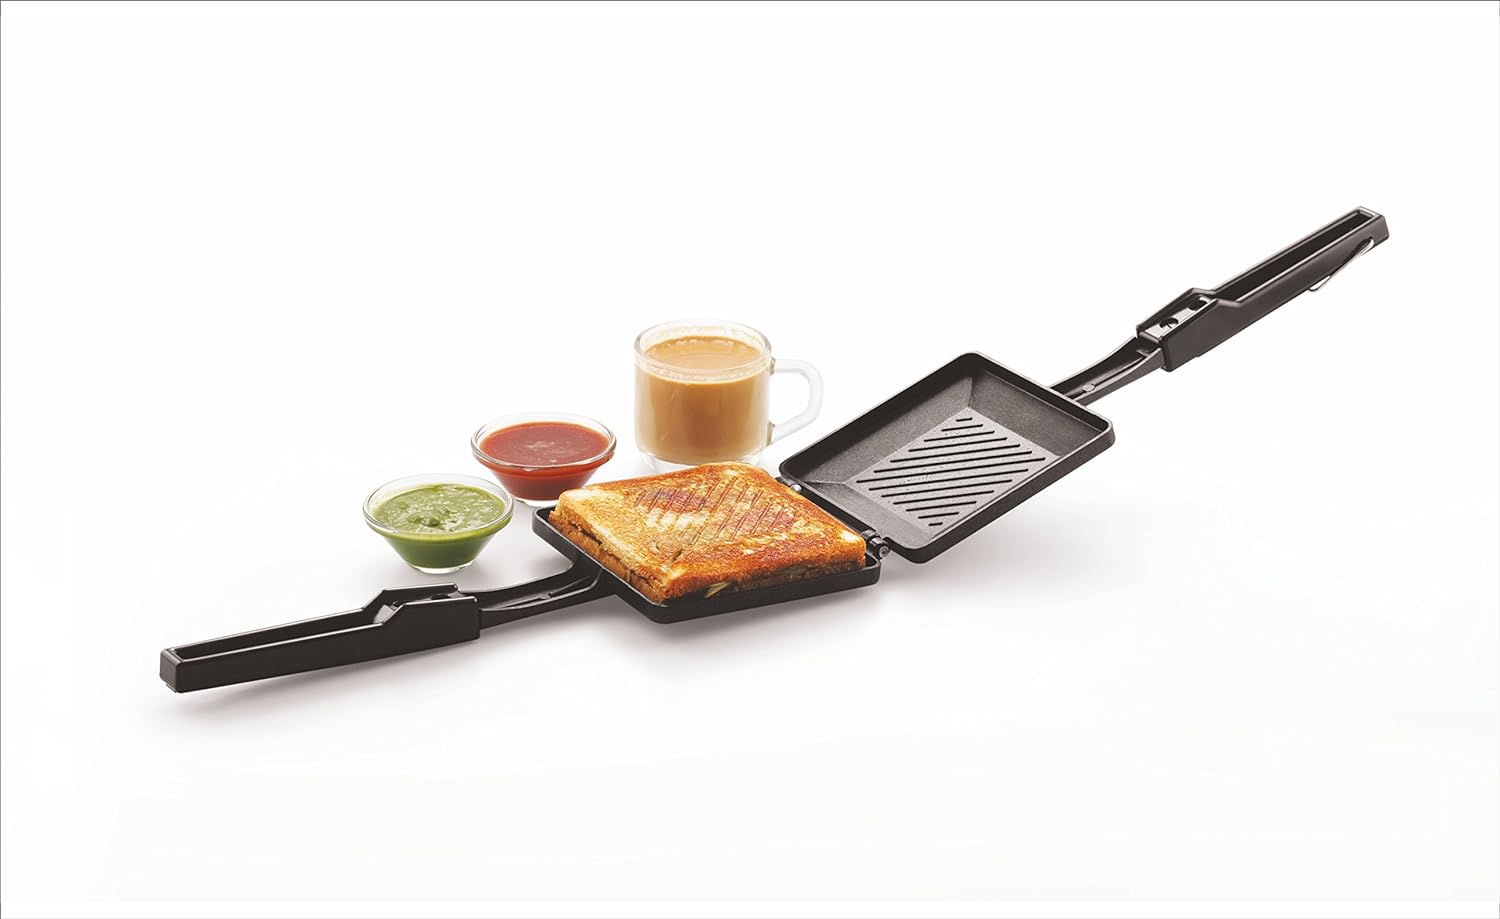 Tosaa Tstsolo Solo Regular Gas Sandwich Toaster (Black),Standard,2.2x13.5x5.3 In,Pack of 1